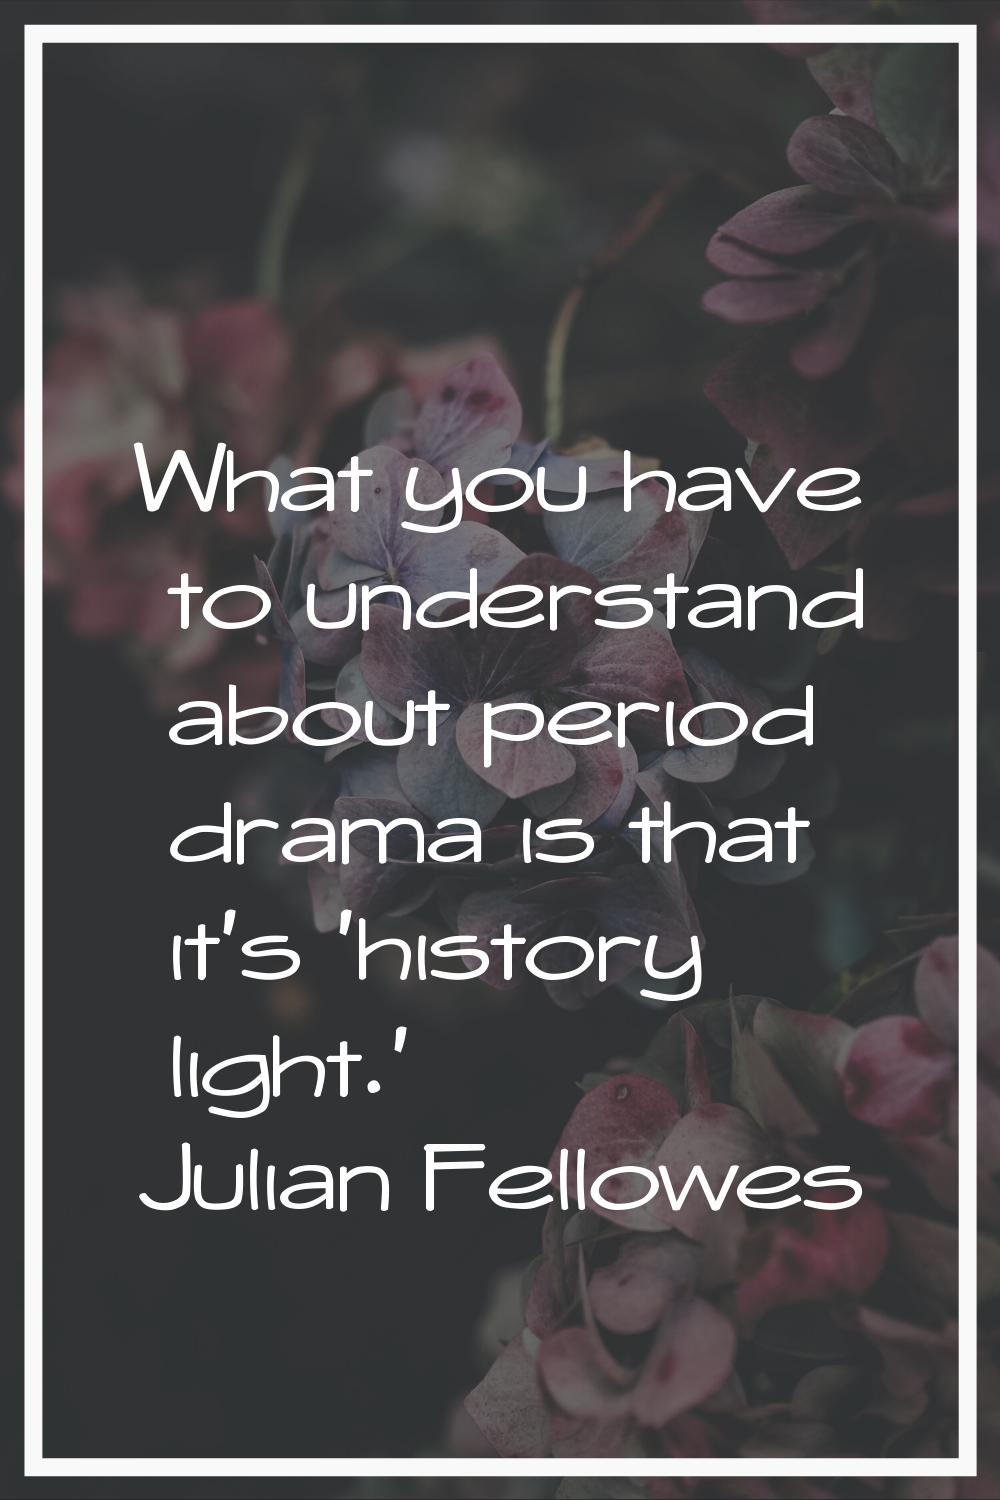 What you have to understand about period drama is that it's 'history light.'